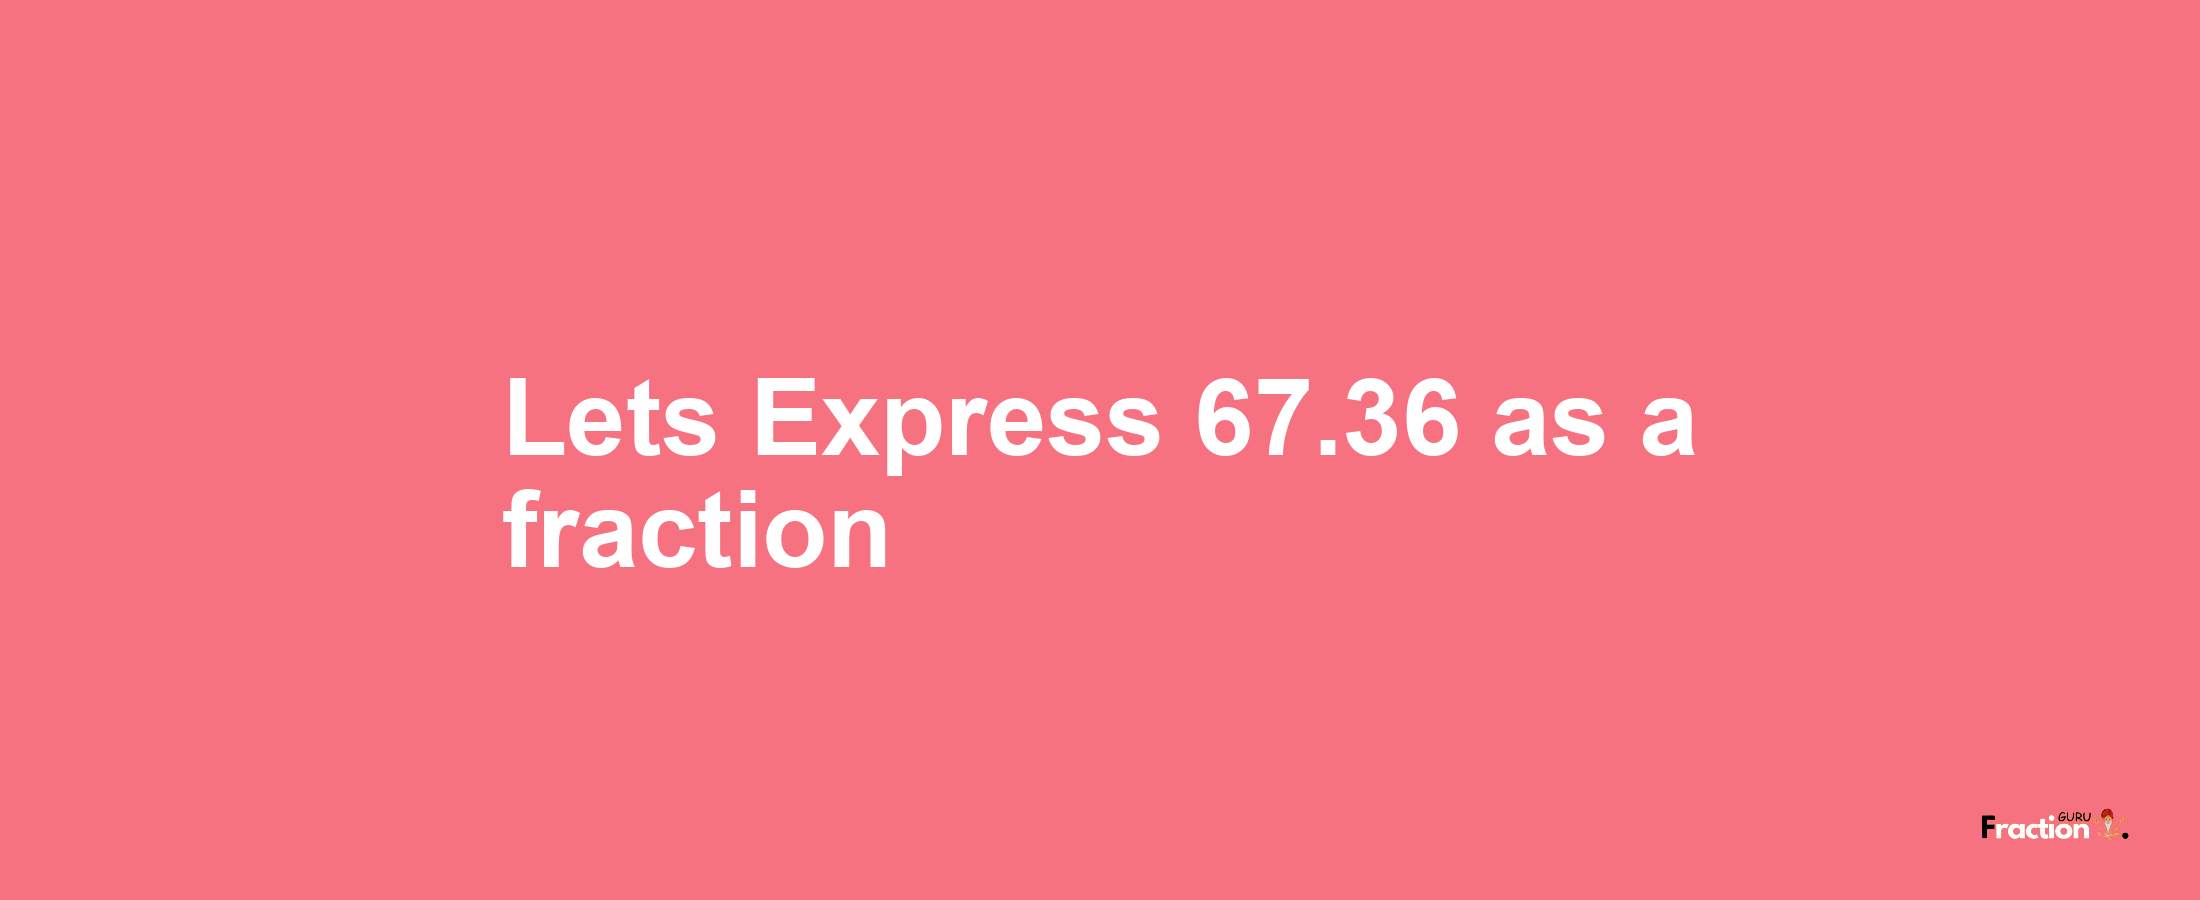 Lets Express 67.36 as afraction